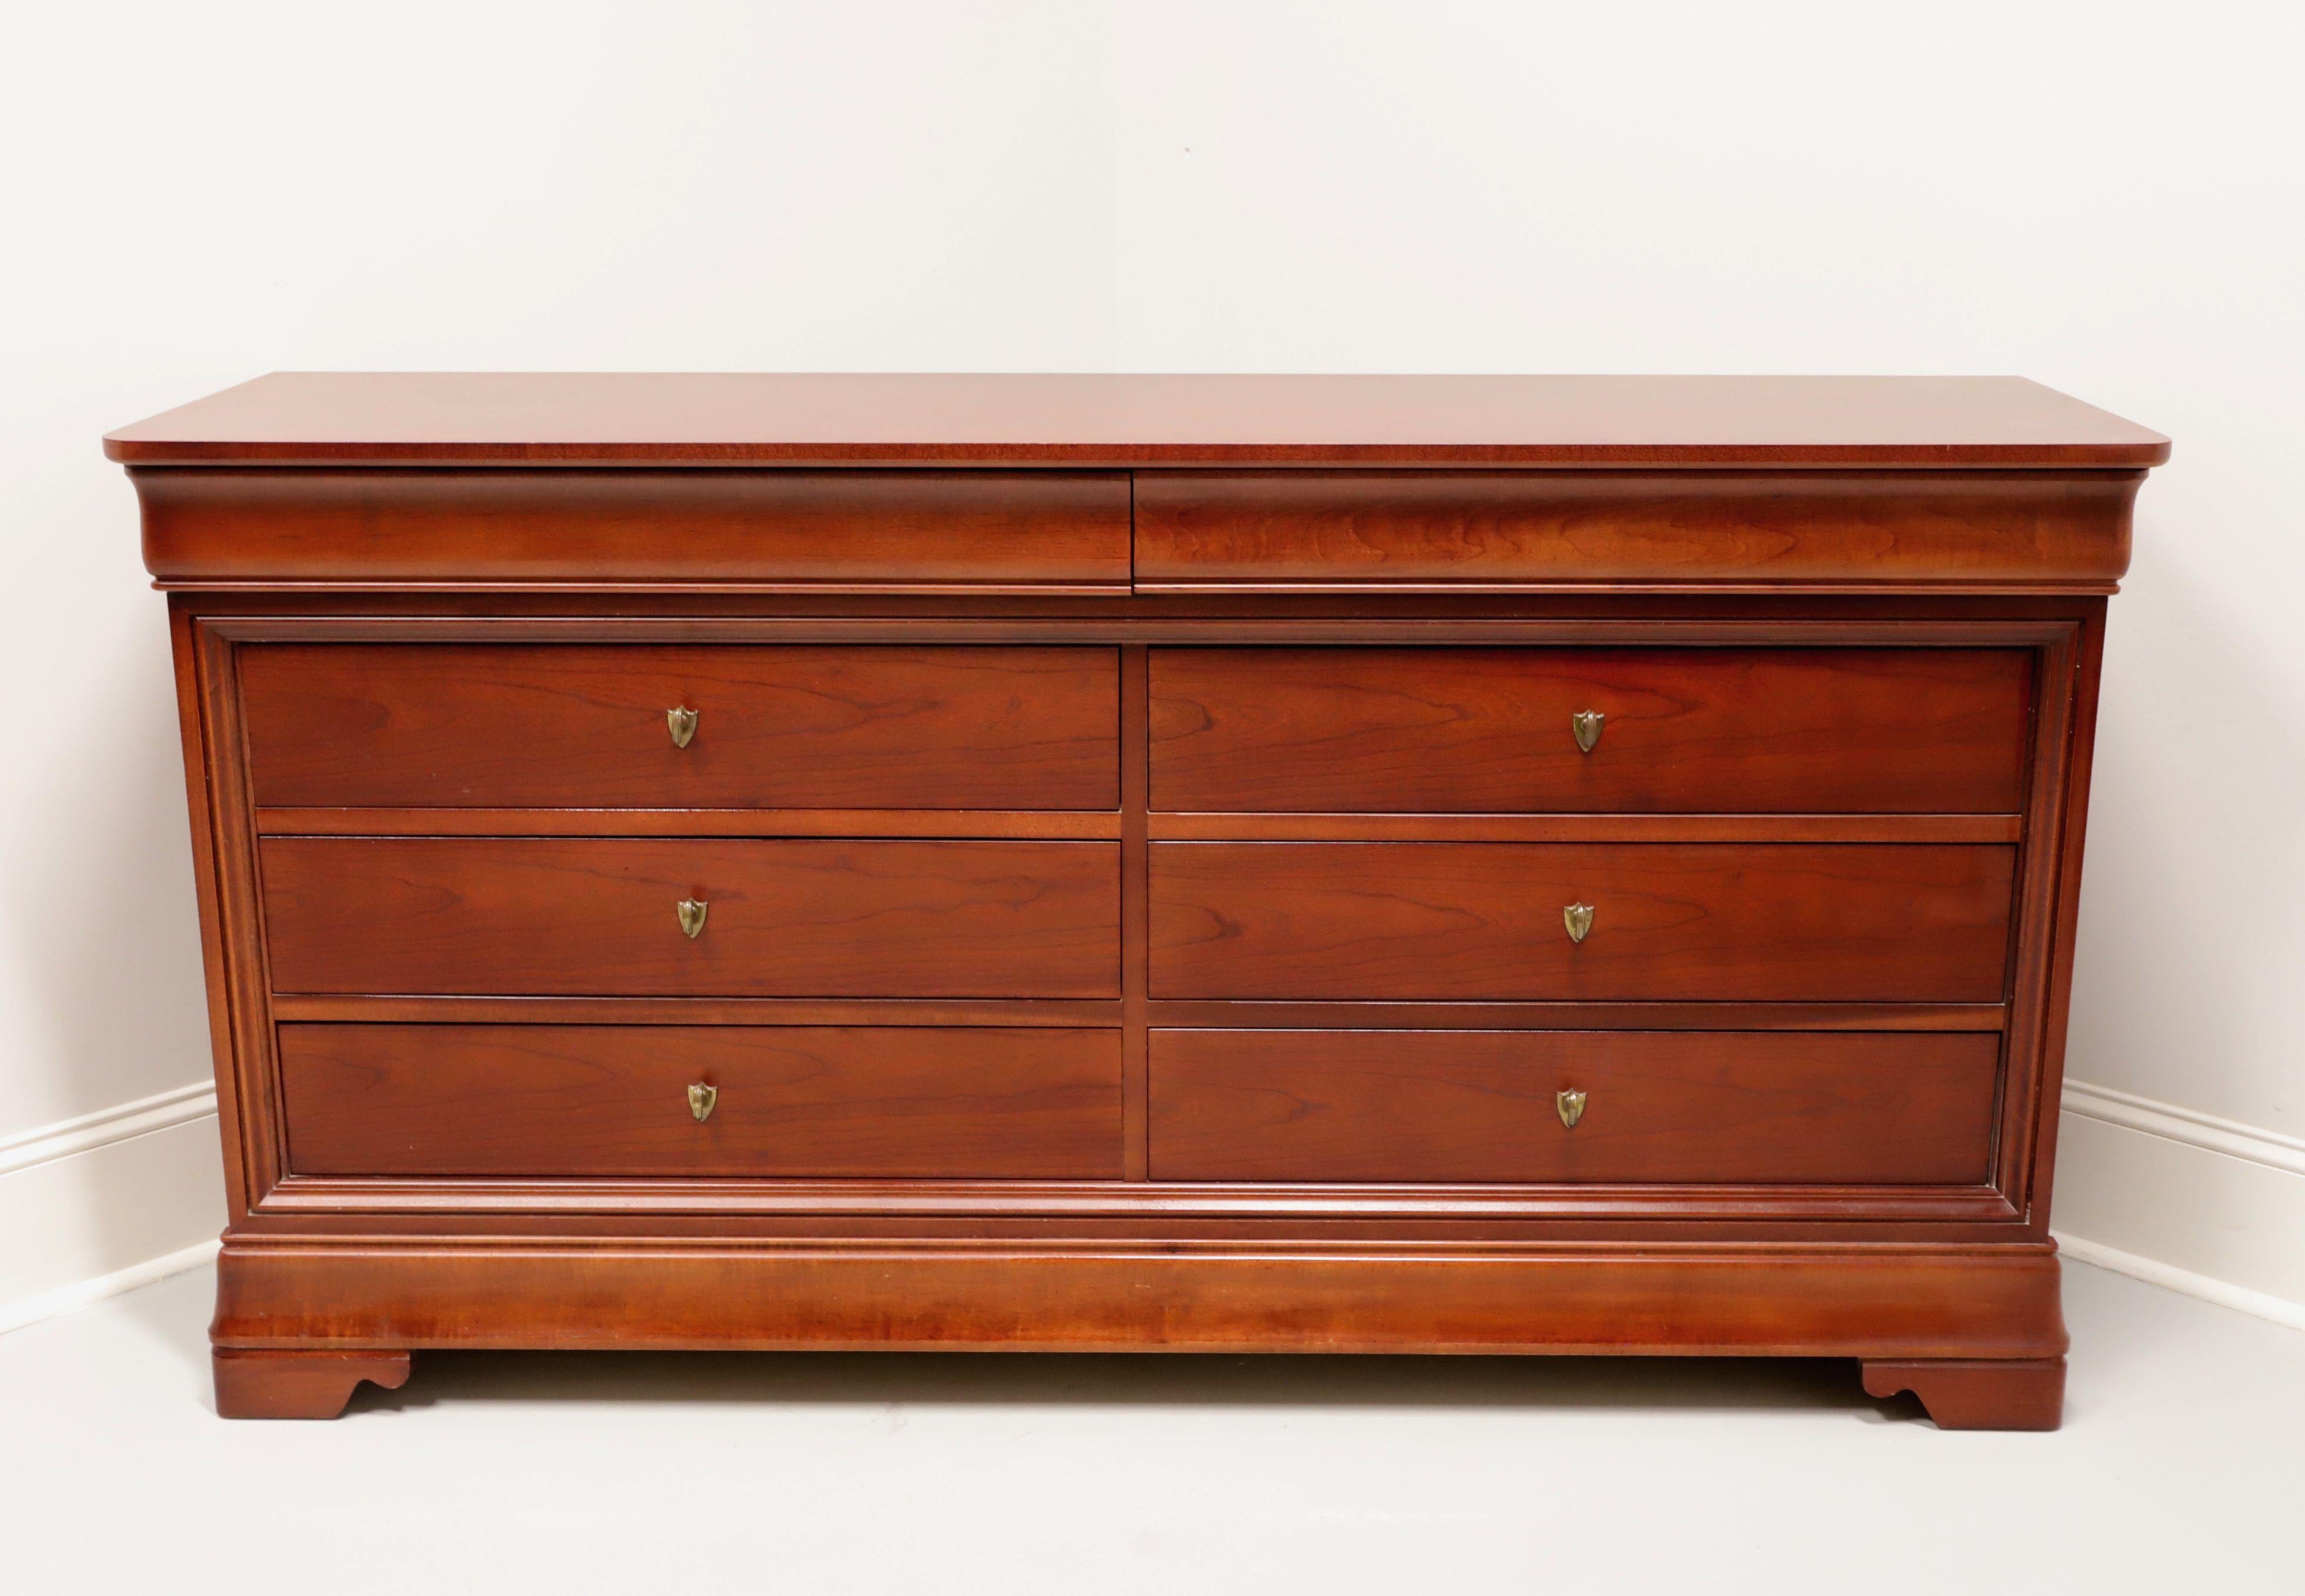 A French Louis Philippe style double dresser by Thomasville, from their Impressions Martinique Collection. Cherry wood with their Merlot finish, brass hardware, rounded corners to top and bracket feet. Features eight drawers of dovetail